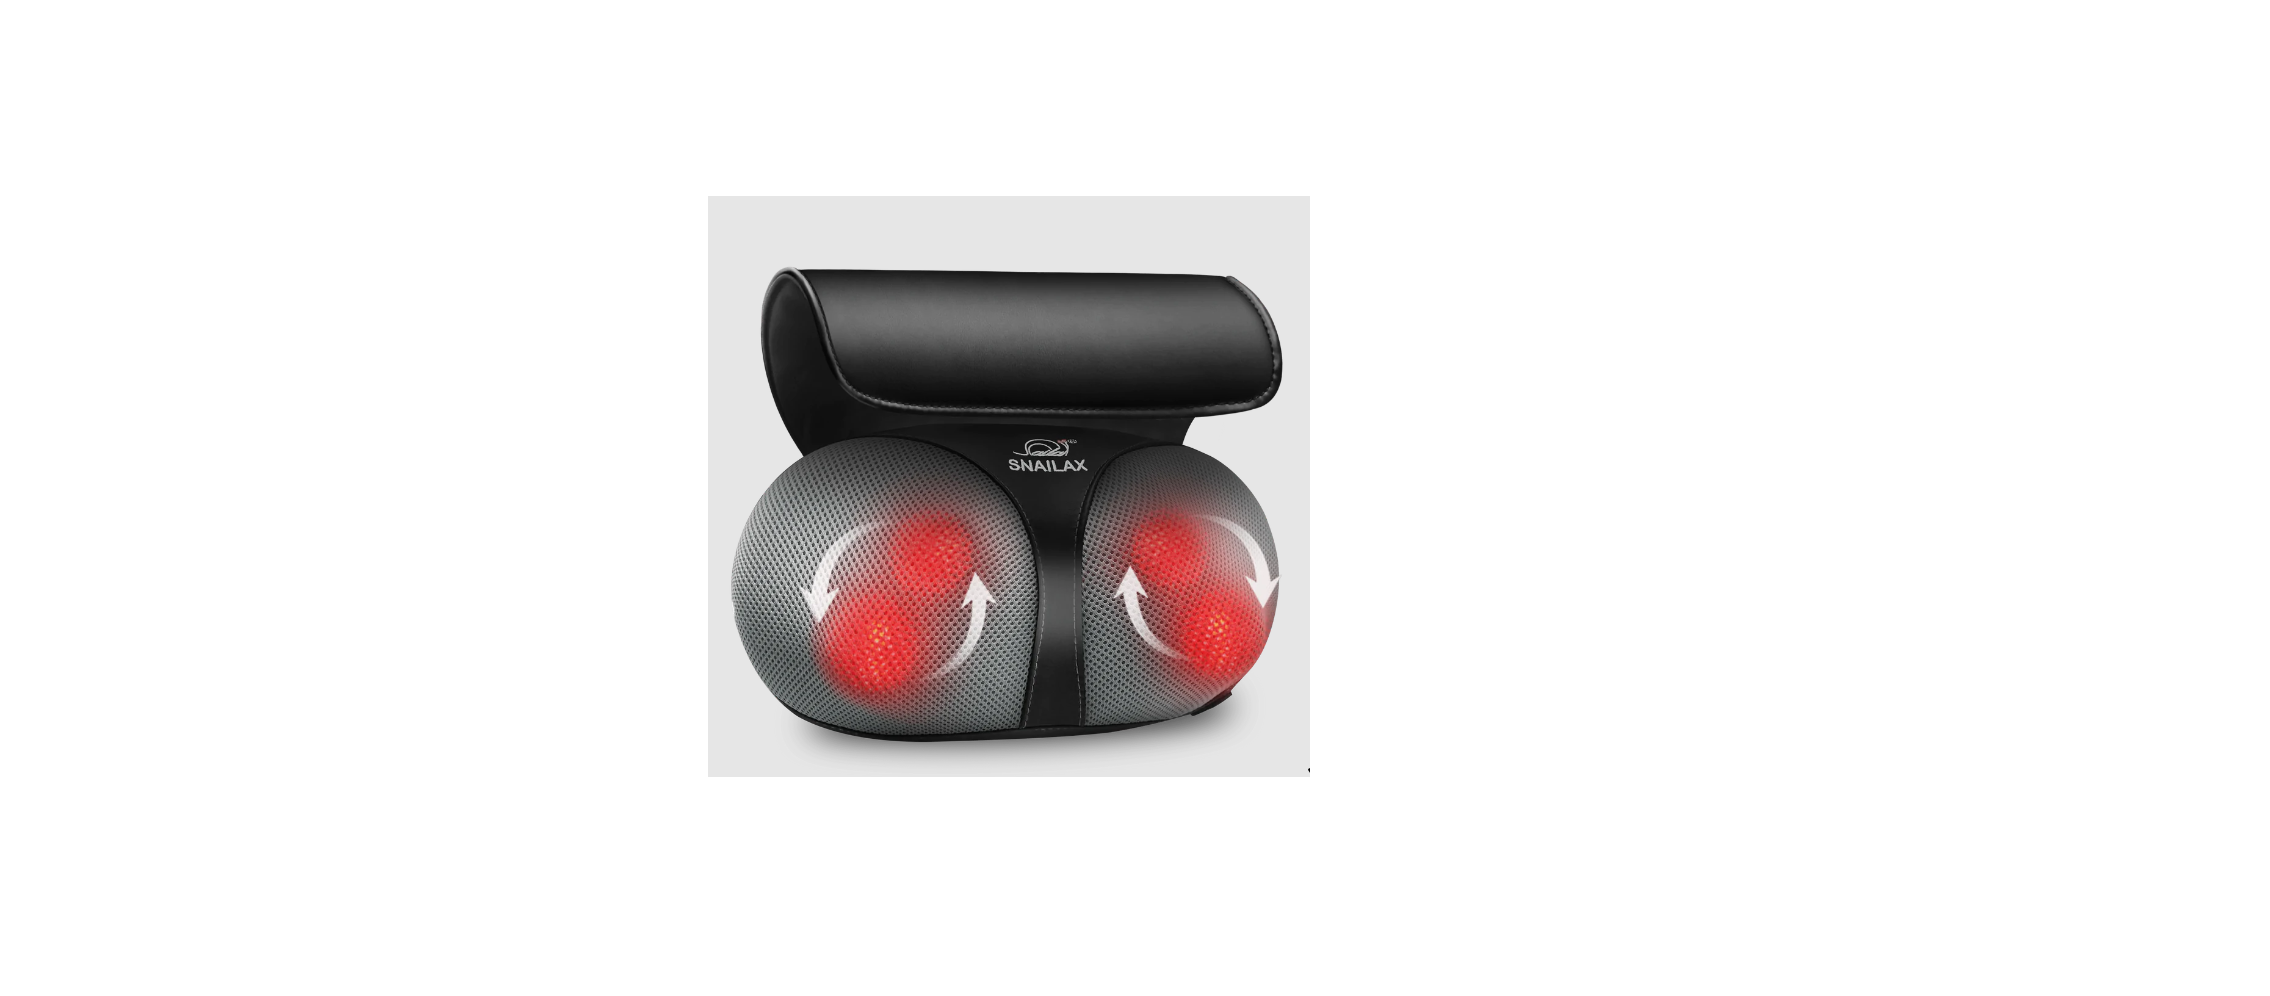 SNAILAX SL-482 Cordless Handheld Massager with Heat User Manual